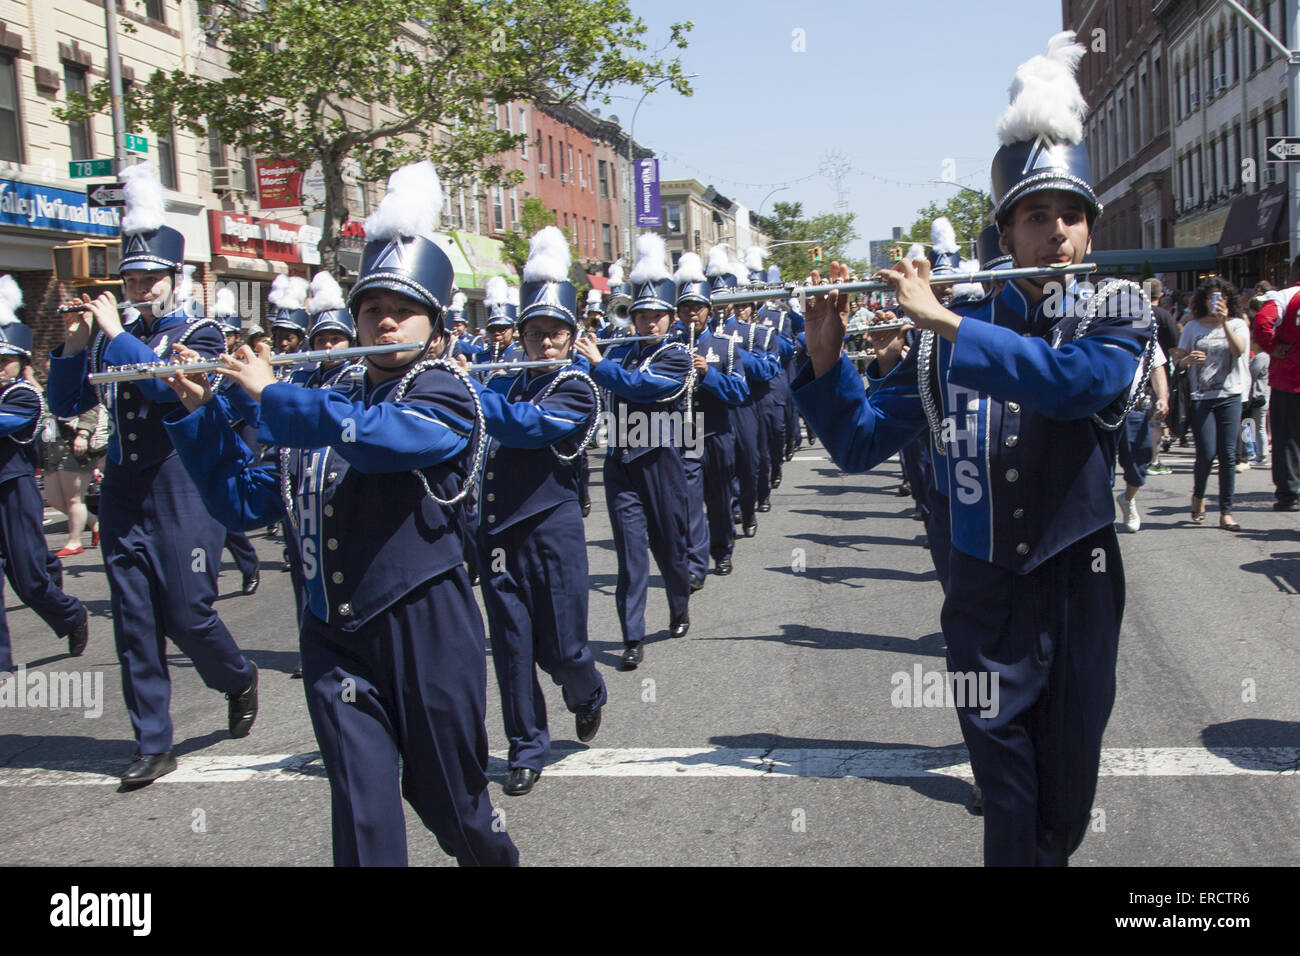 Fort Hamilton High School Marching Band marches & joue au Memorial Day Parade dans Bay Ridge, Brooklyn, New York. Banque D'Images